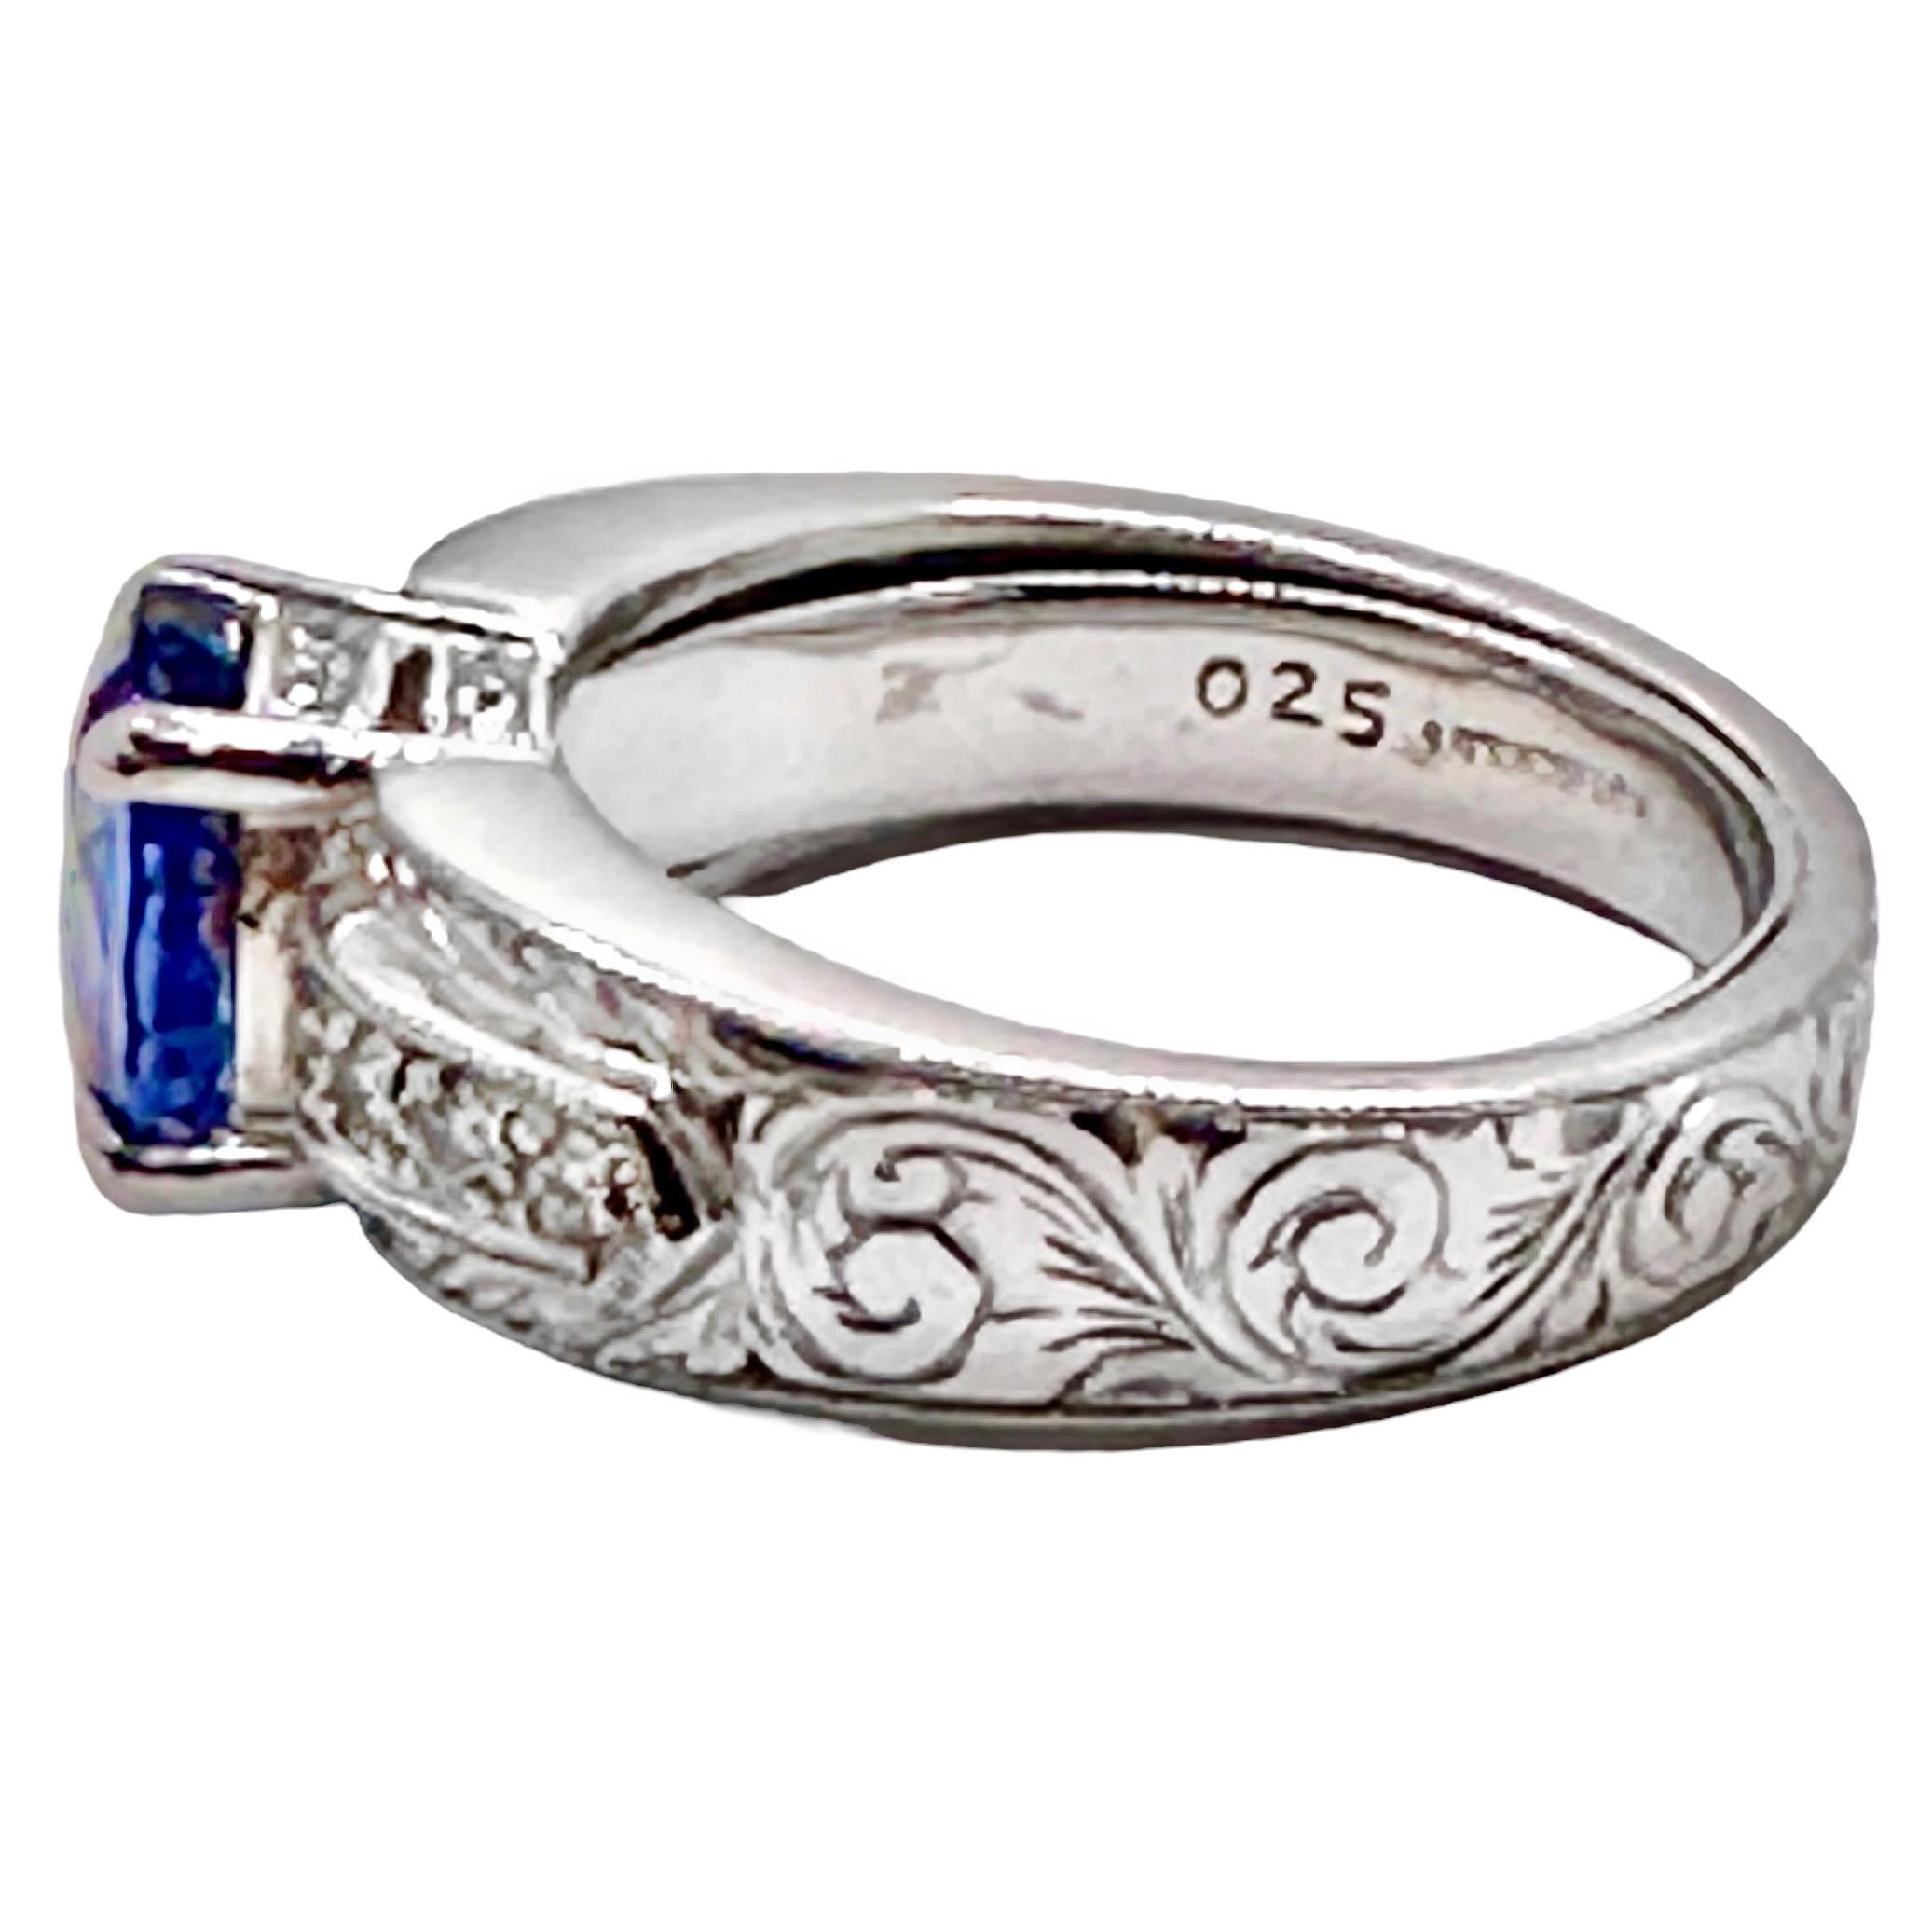 Brilliant Cut Mid-20th Century Hand Engraved Platinum, Sapphire, and Diamond Cocktail Ring For Sale